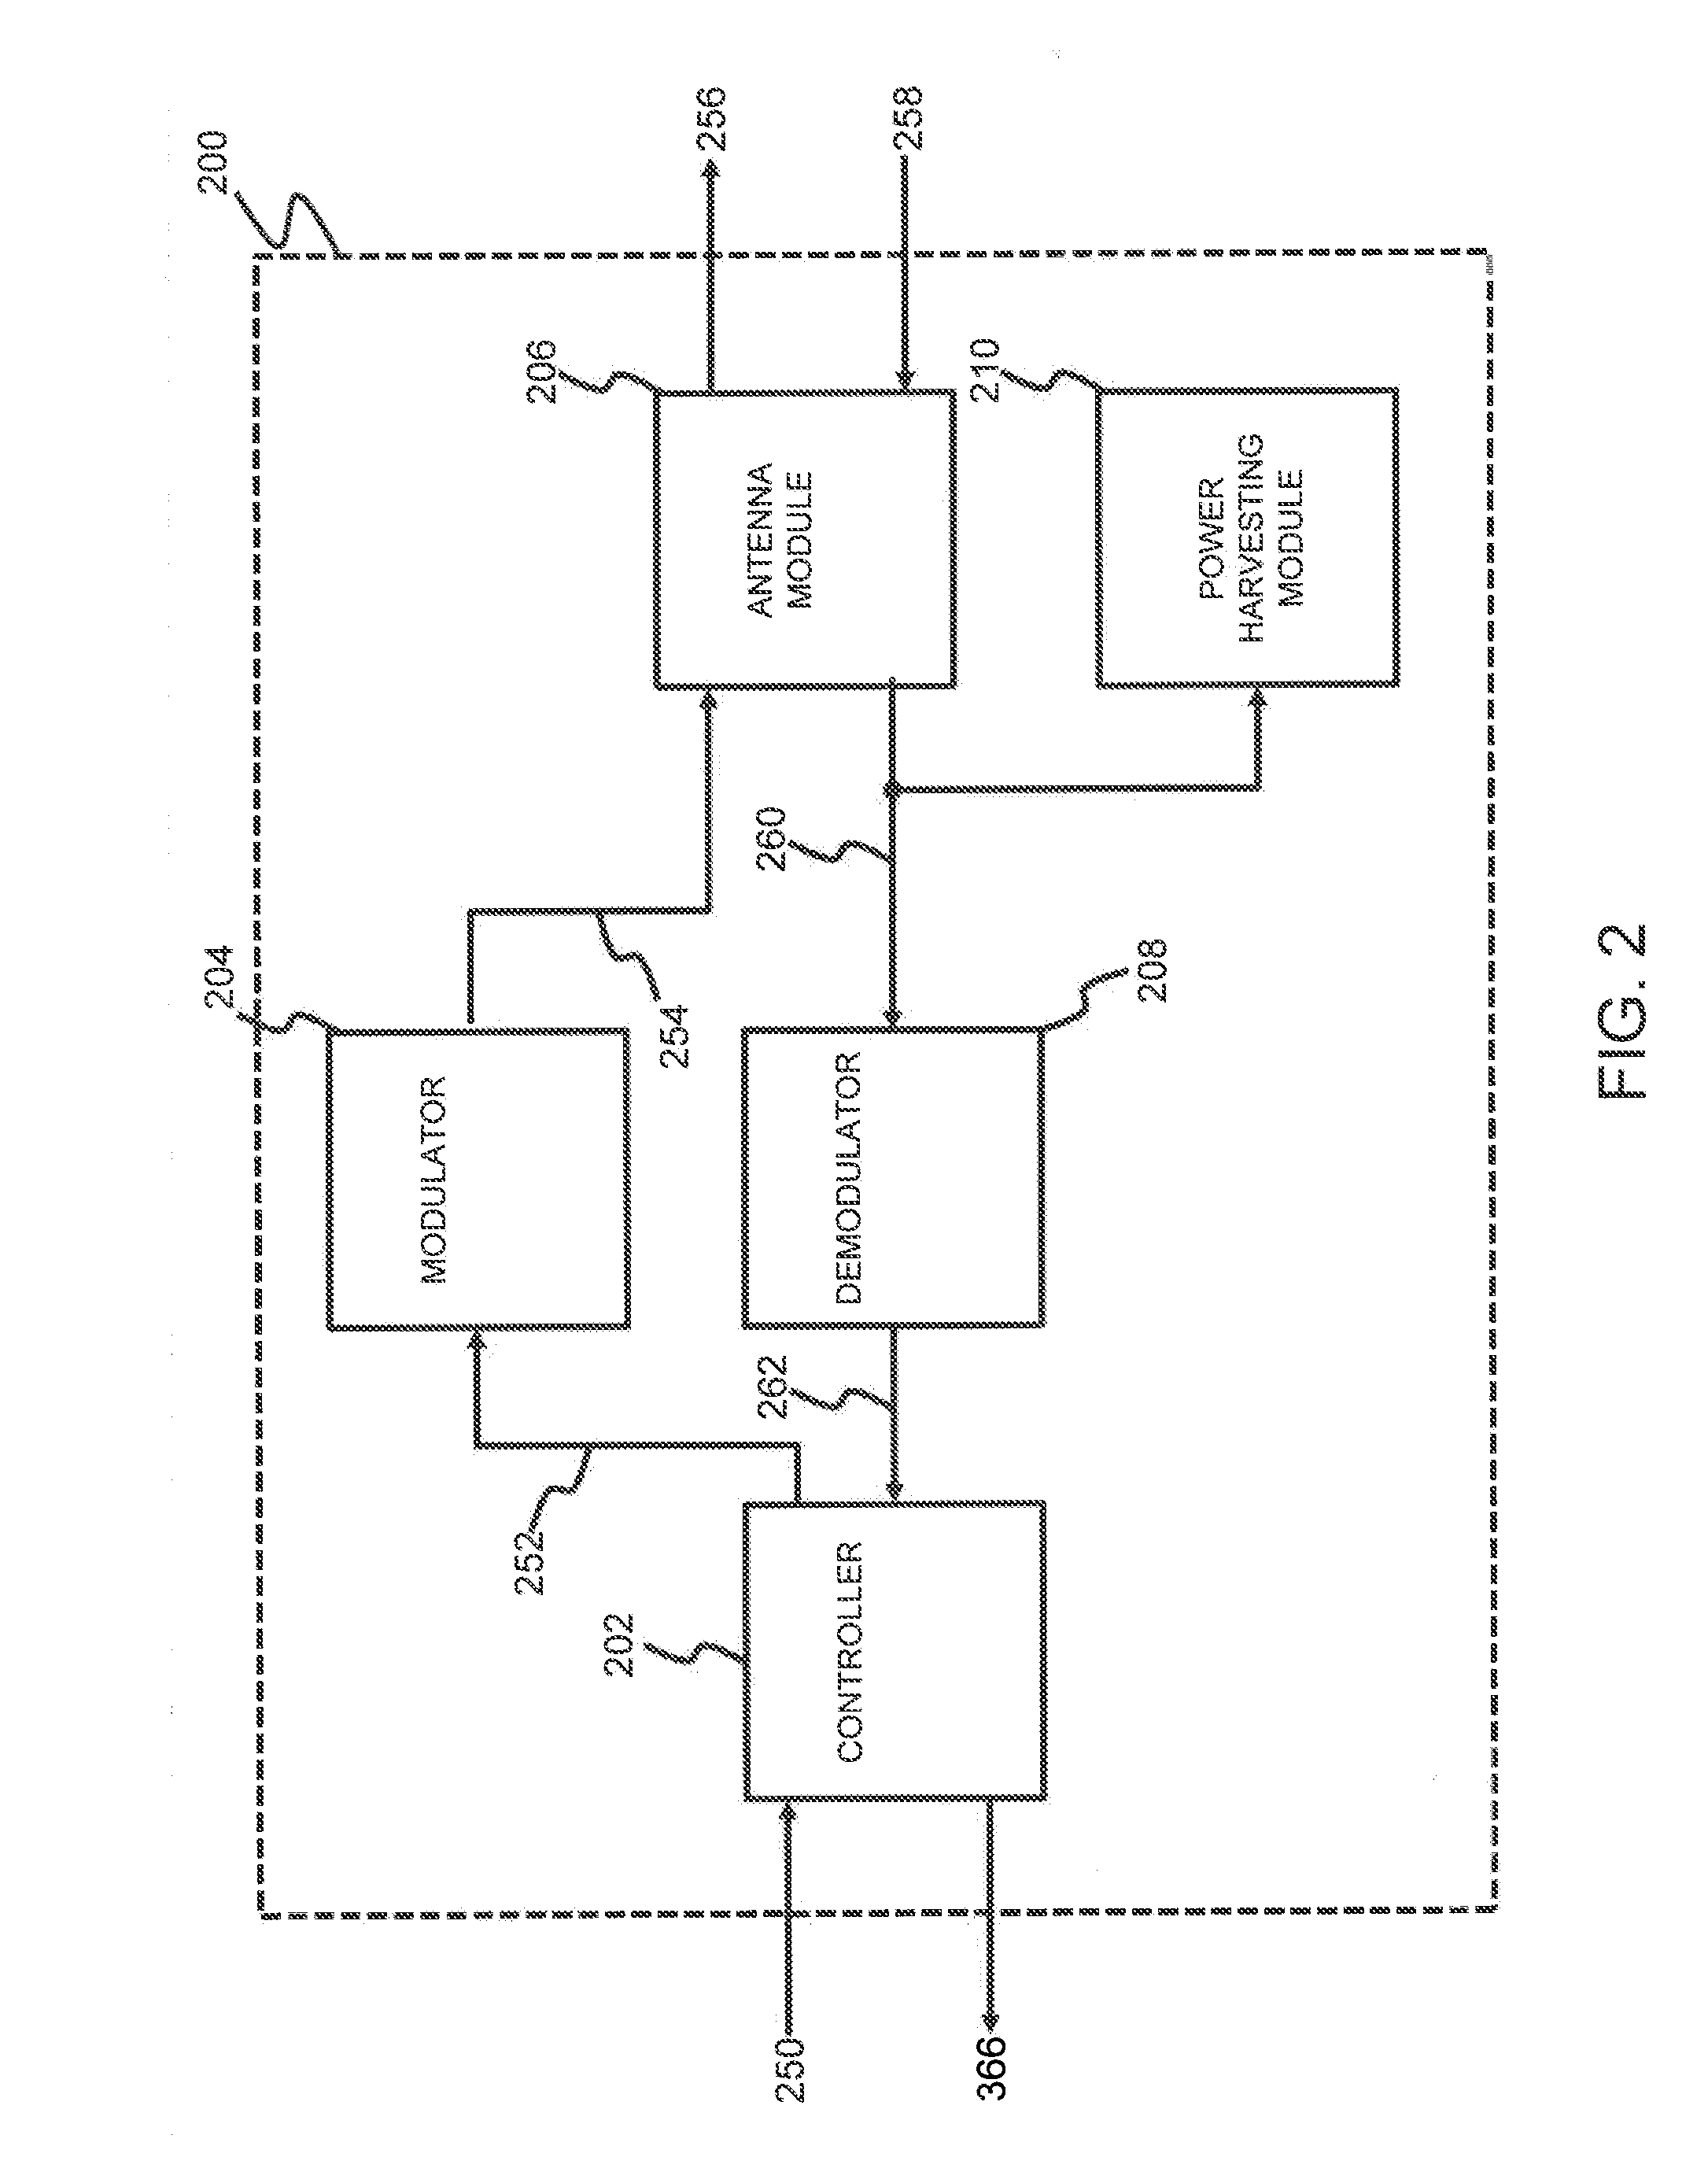 Systems and Methods for Providing NFC Secure Application Support in Battery-Off Mode When No Nonvolatile Memory Write Access is Available